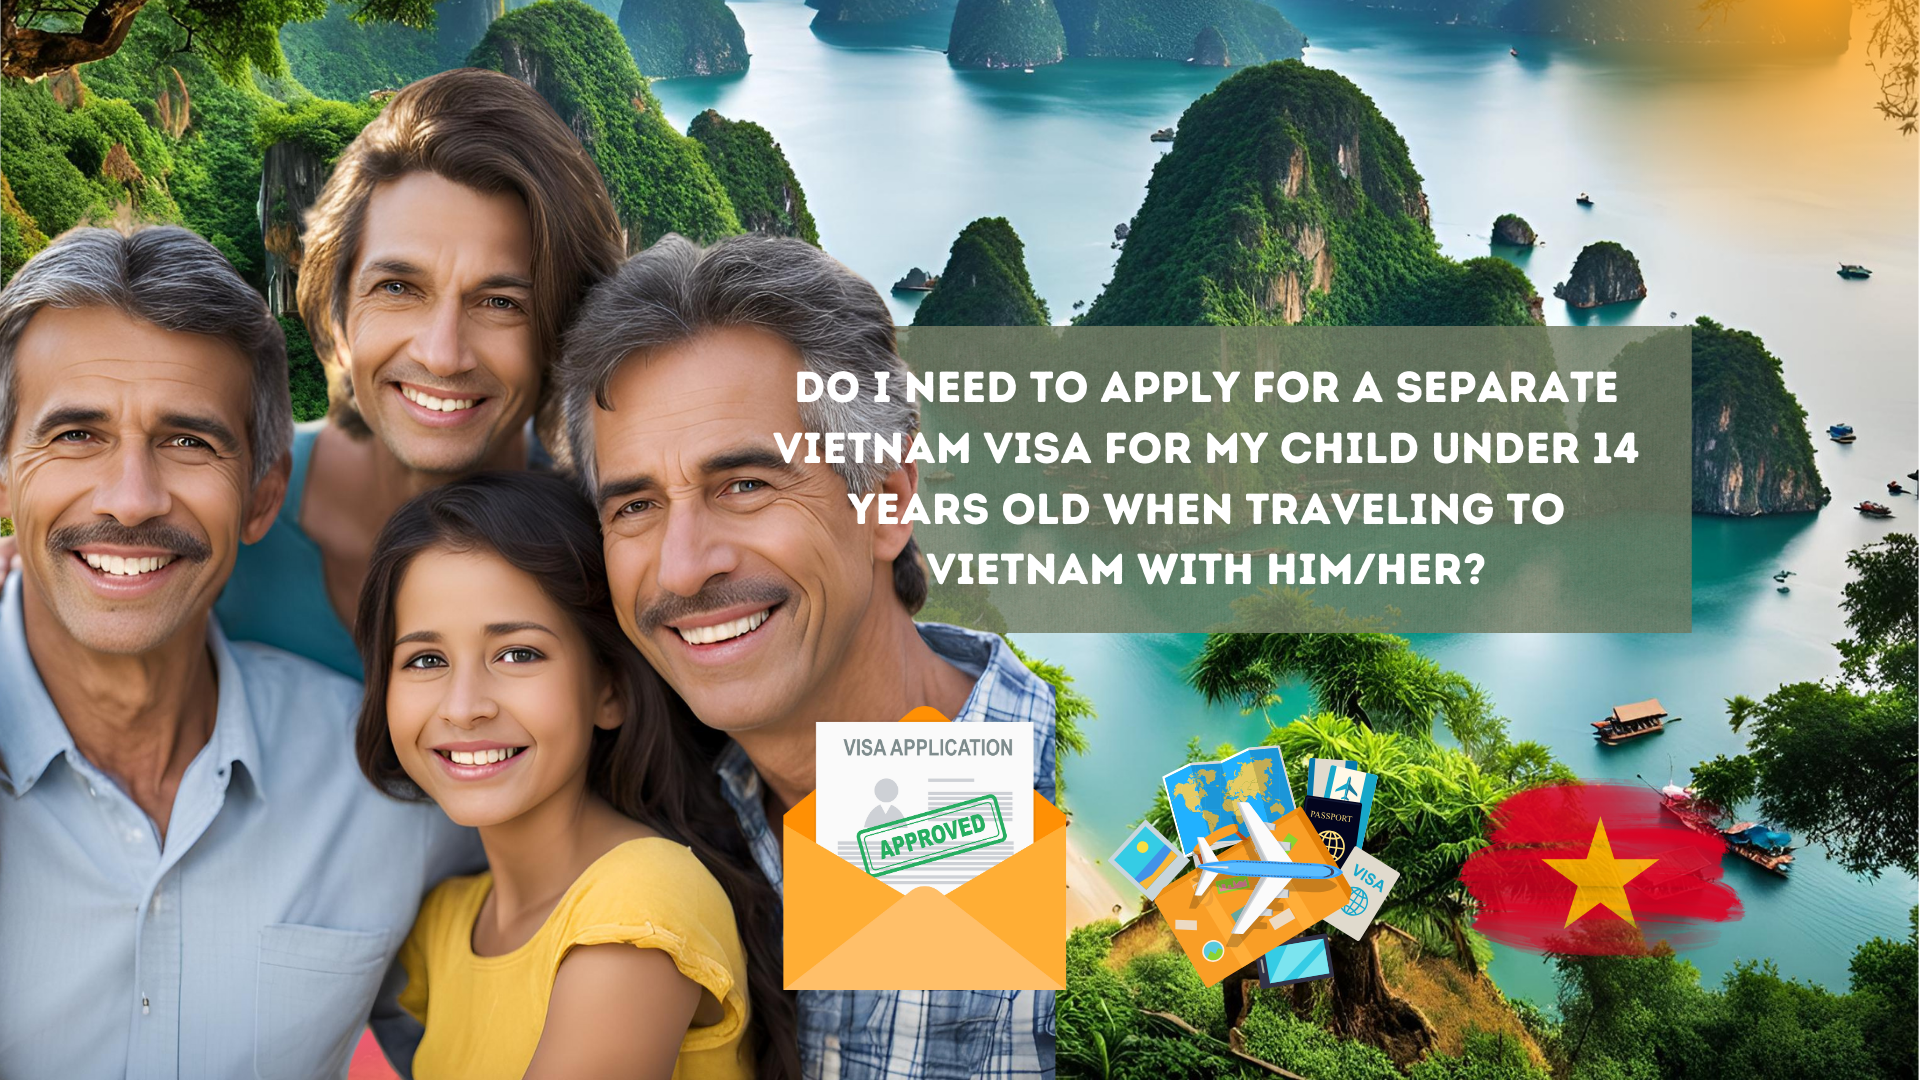 Do I need to apply for a separate Vietnam visa for my child under 14 years old when traveling to Vietnam with him/her?